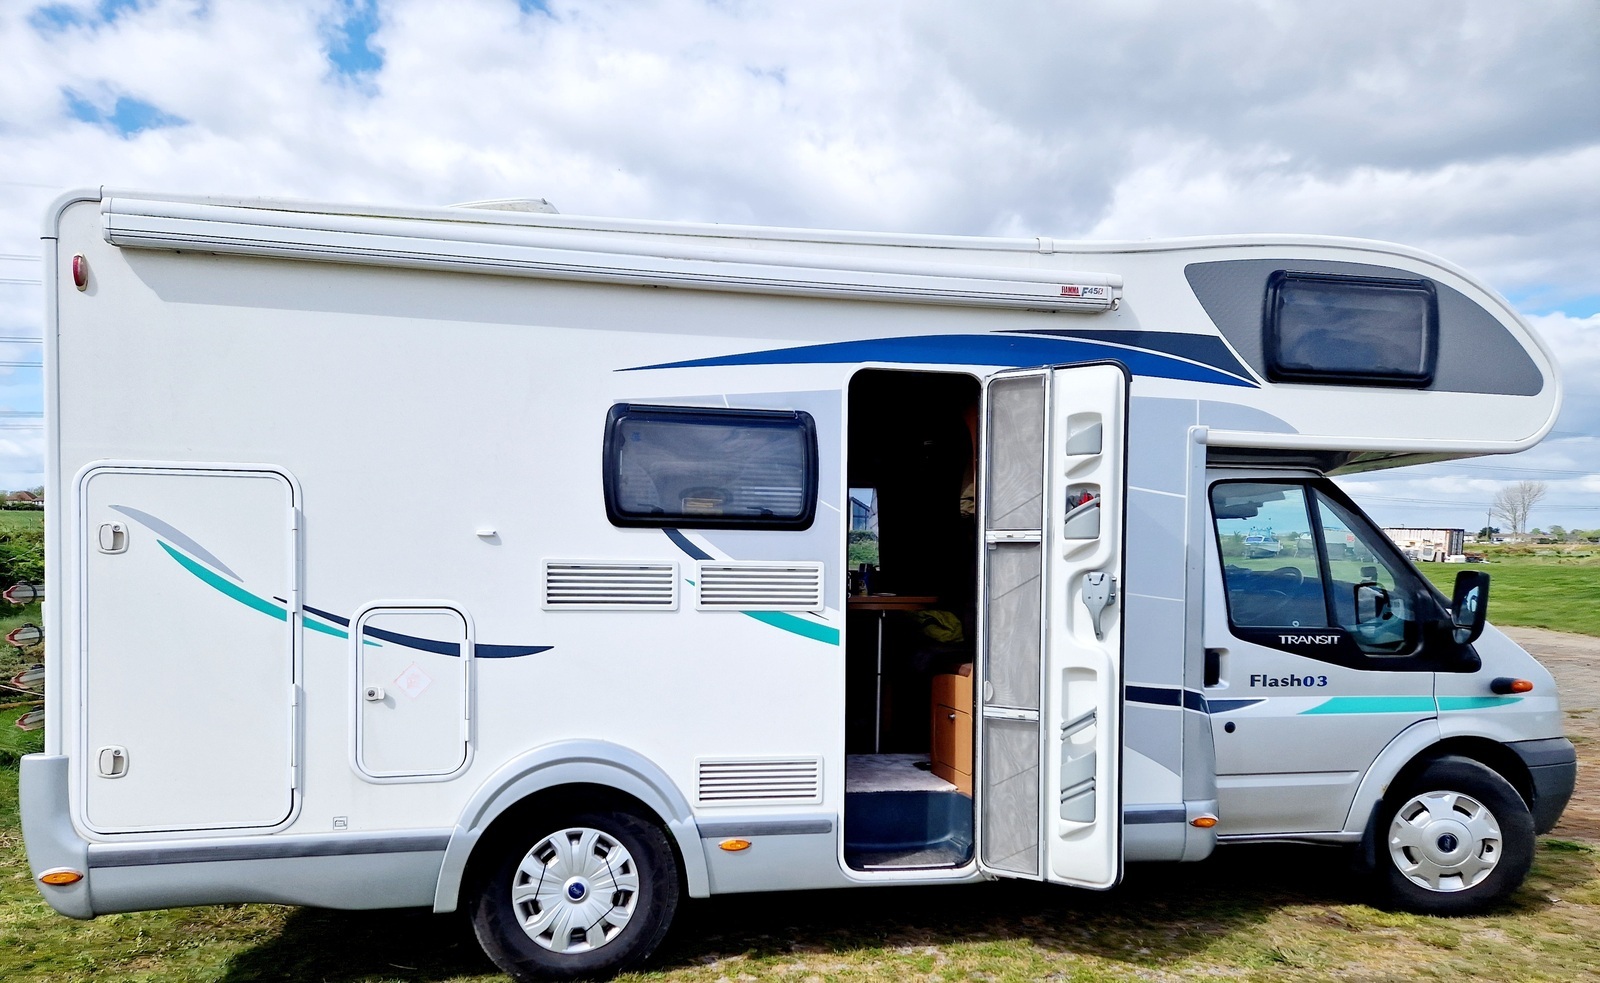 Now they make £30k a year renting out their motorhomes